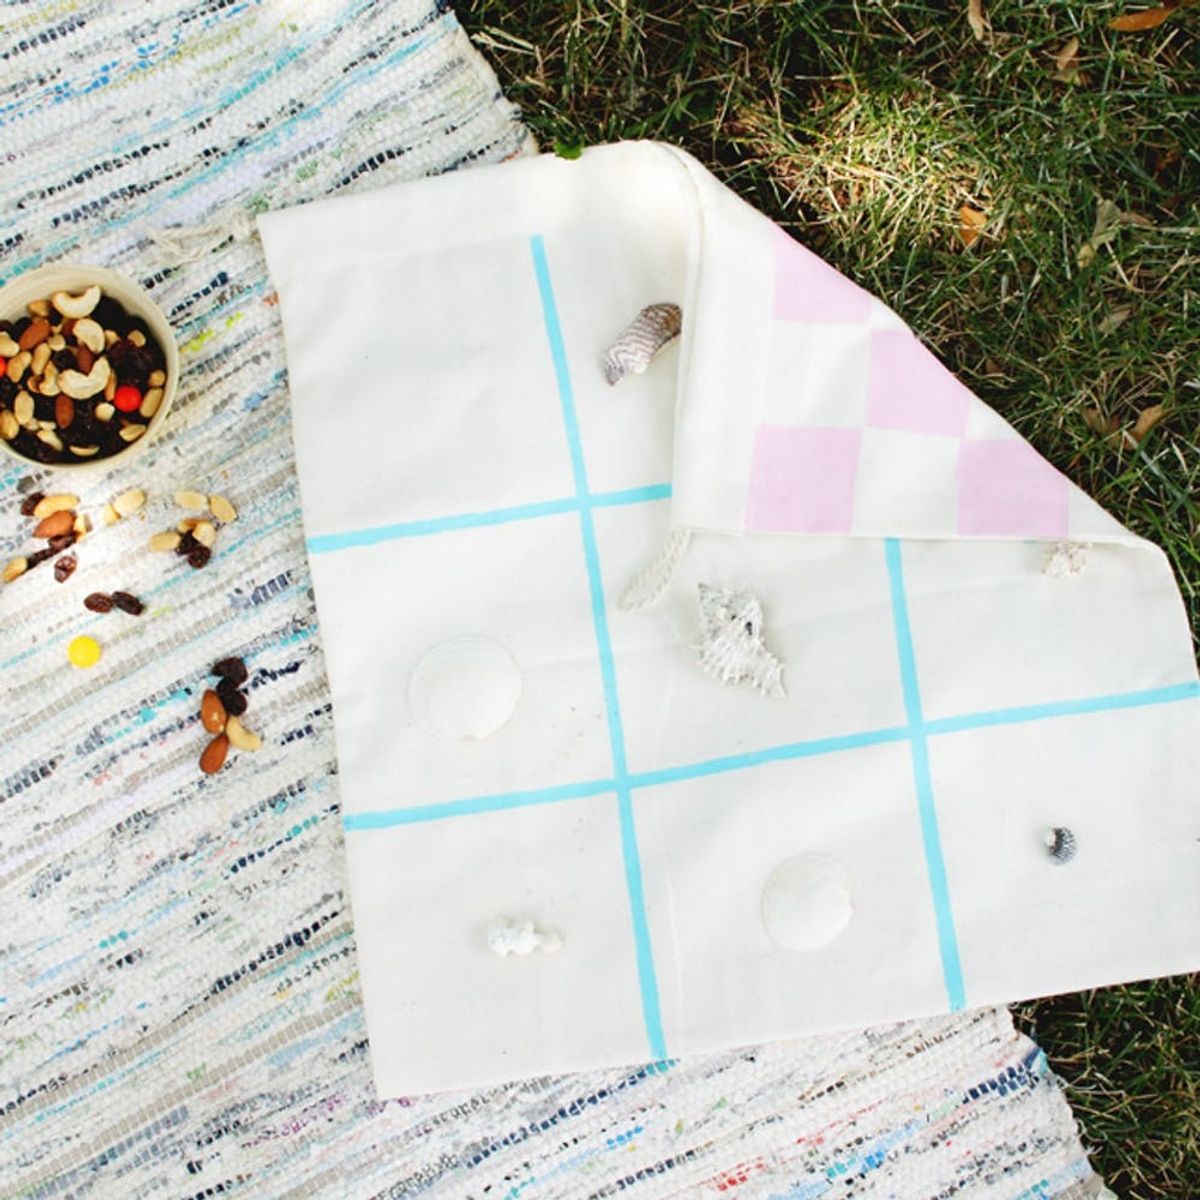 Create This Portable Game Board for a Fun Camping Trip